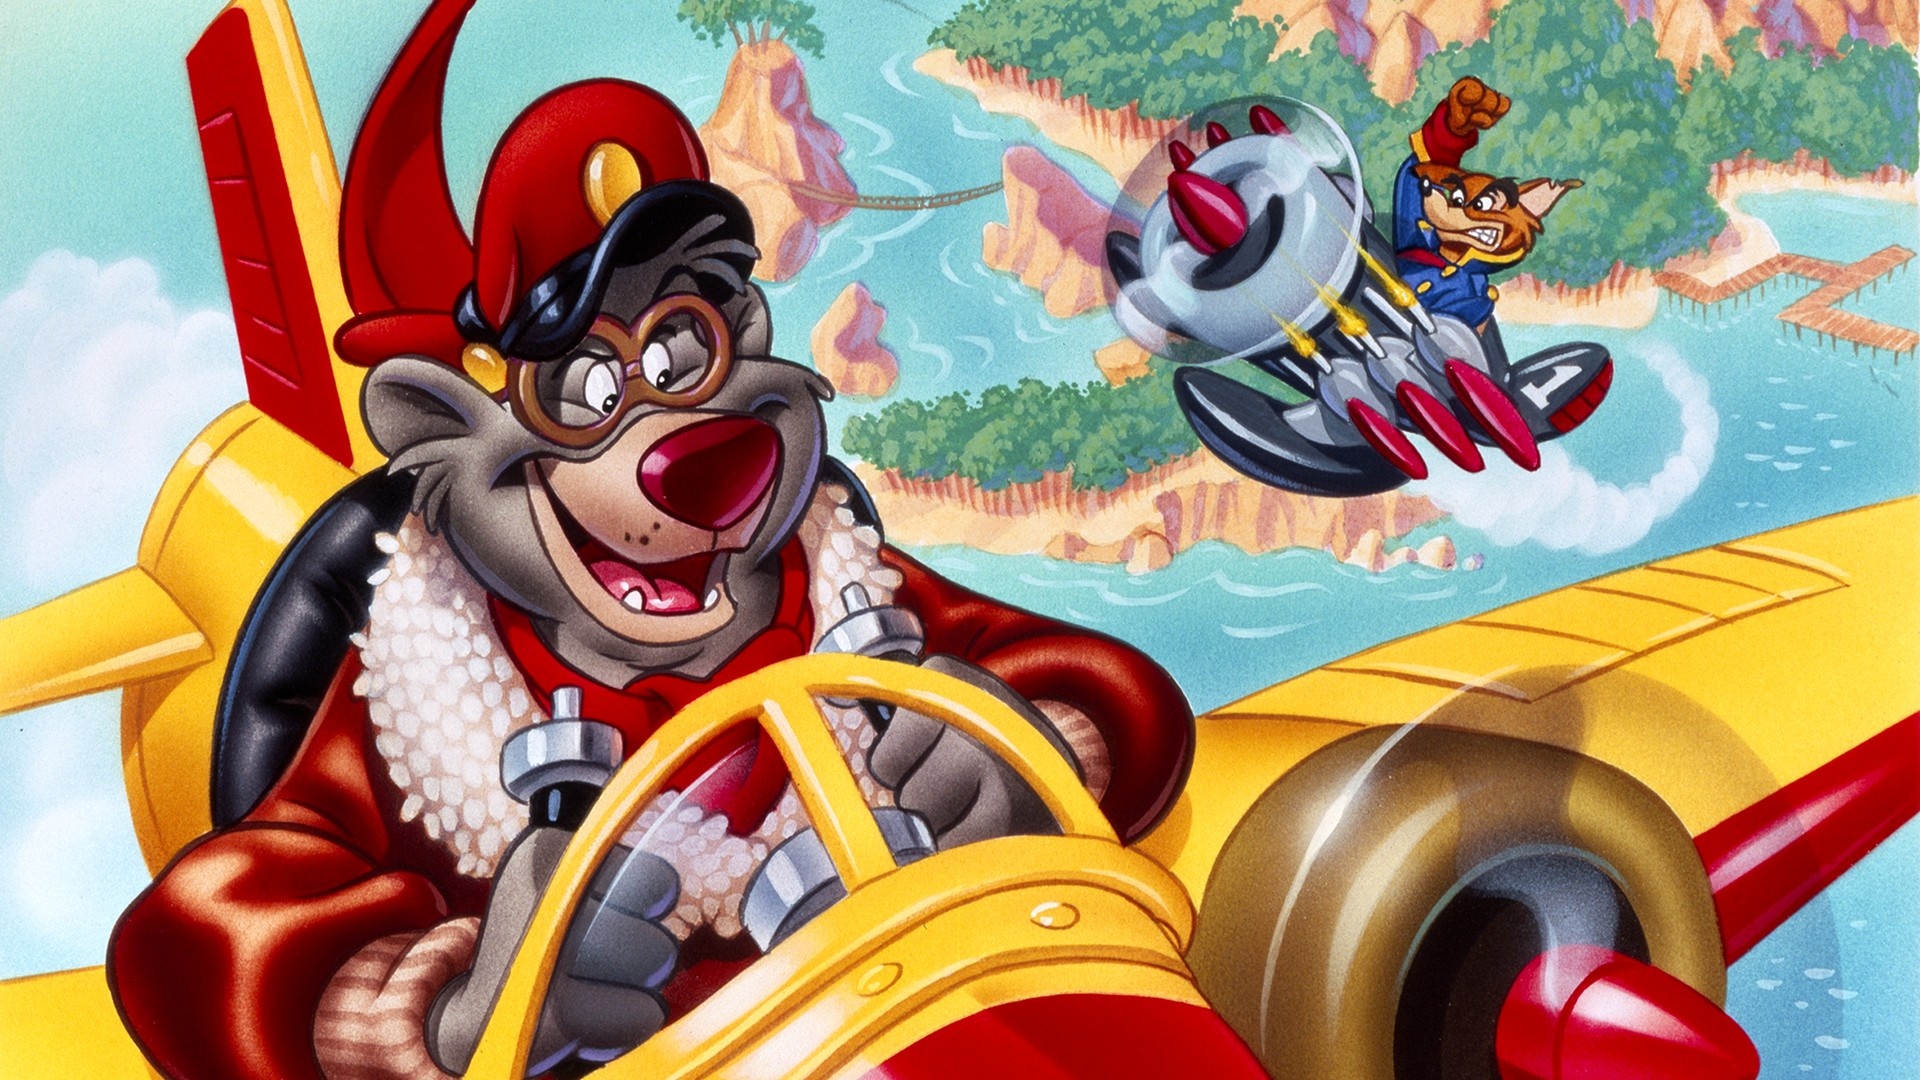 TaleSpin animation, The Disney Afternoon Collection, Xbox achievements, 1920x1080 Full HD Desktop